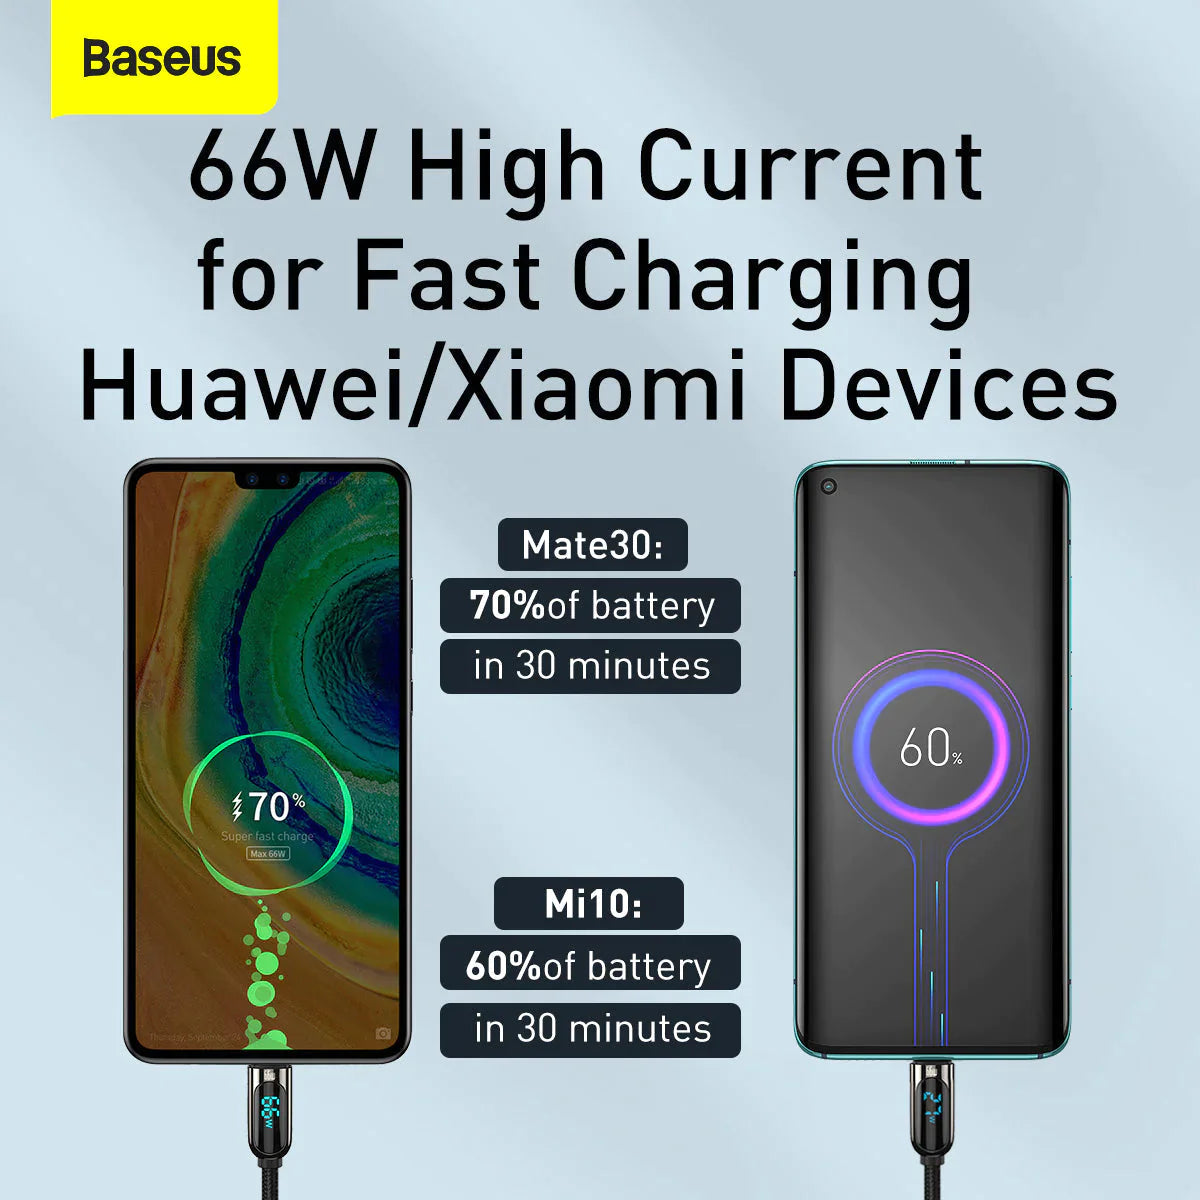 BASEUS DISPLAY SERIES FAST CHARGING DATA CABLE USB TO TYPE-C (DIGITAL DISPLAY OF POWER)(66W)(1M) - Black